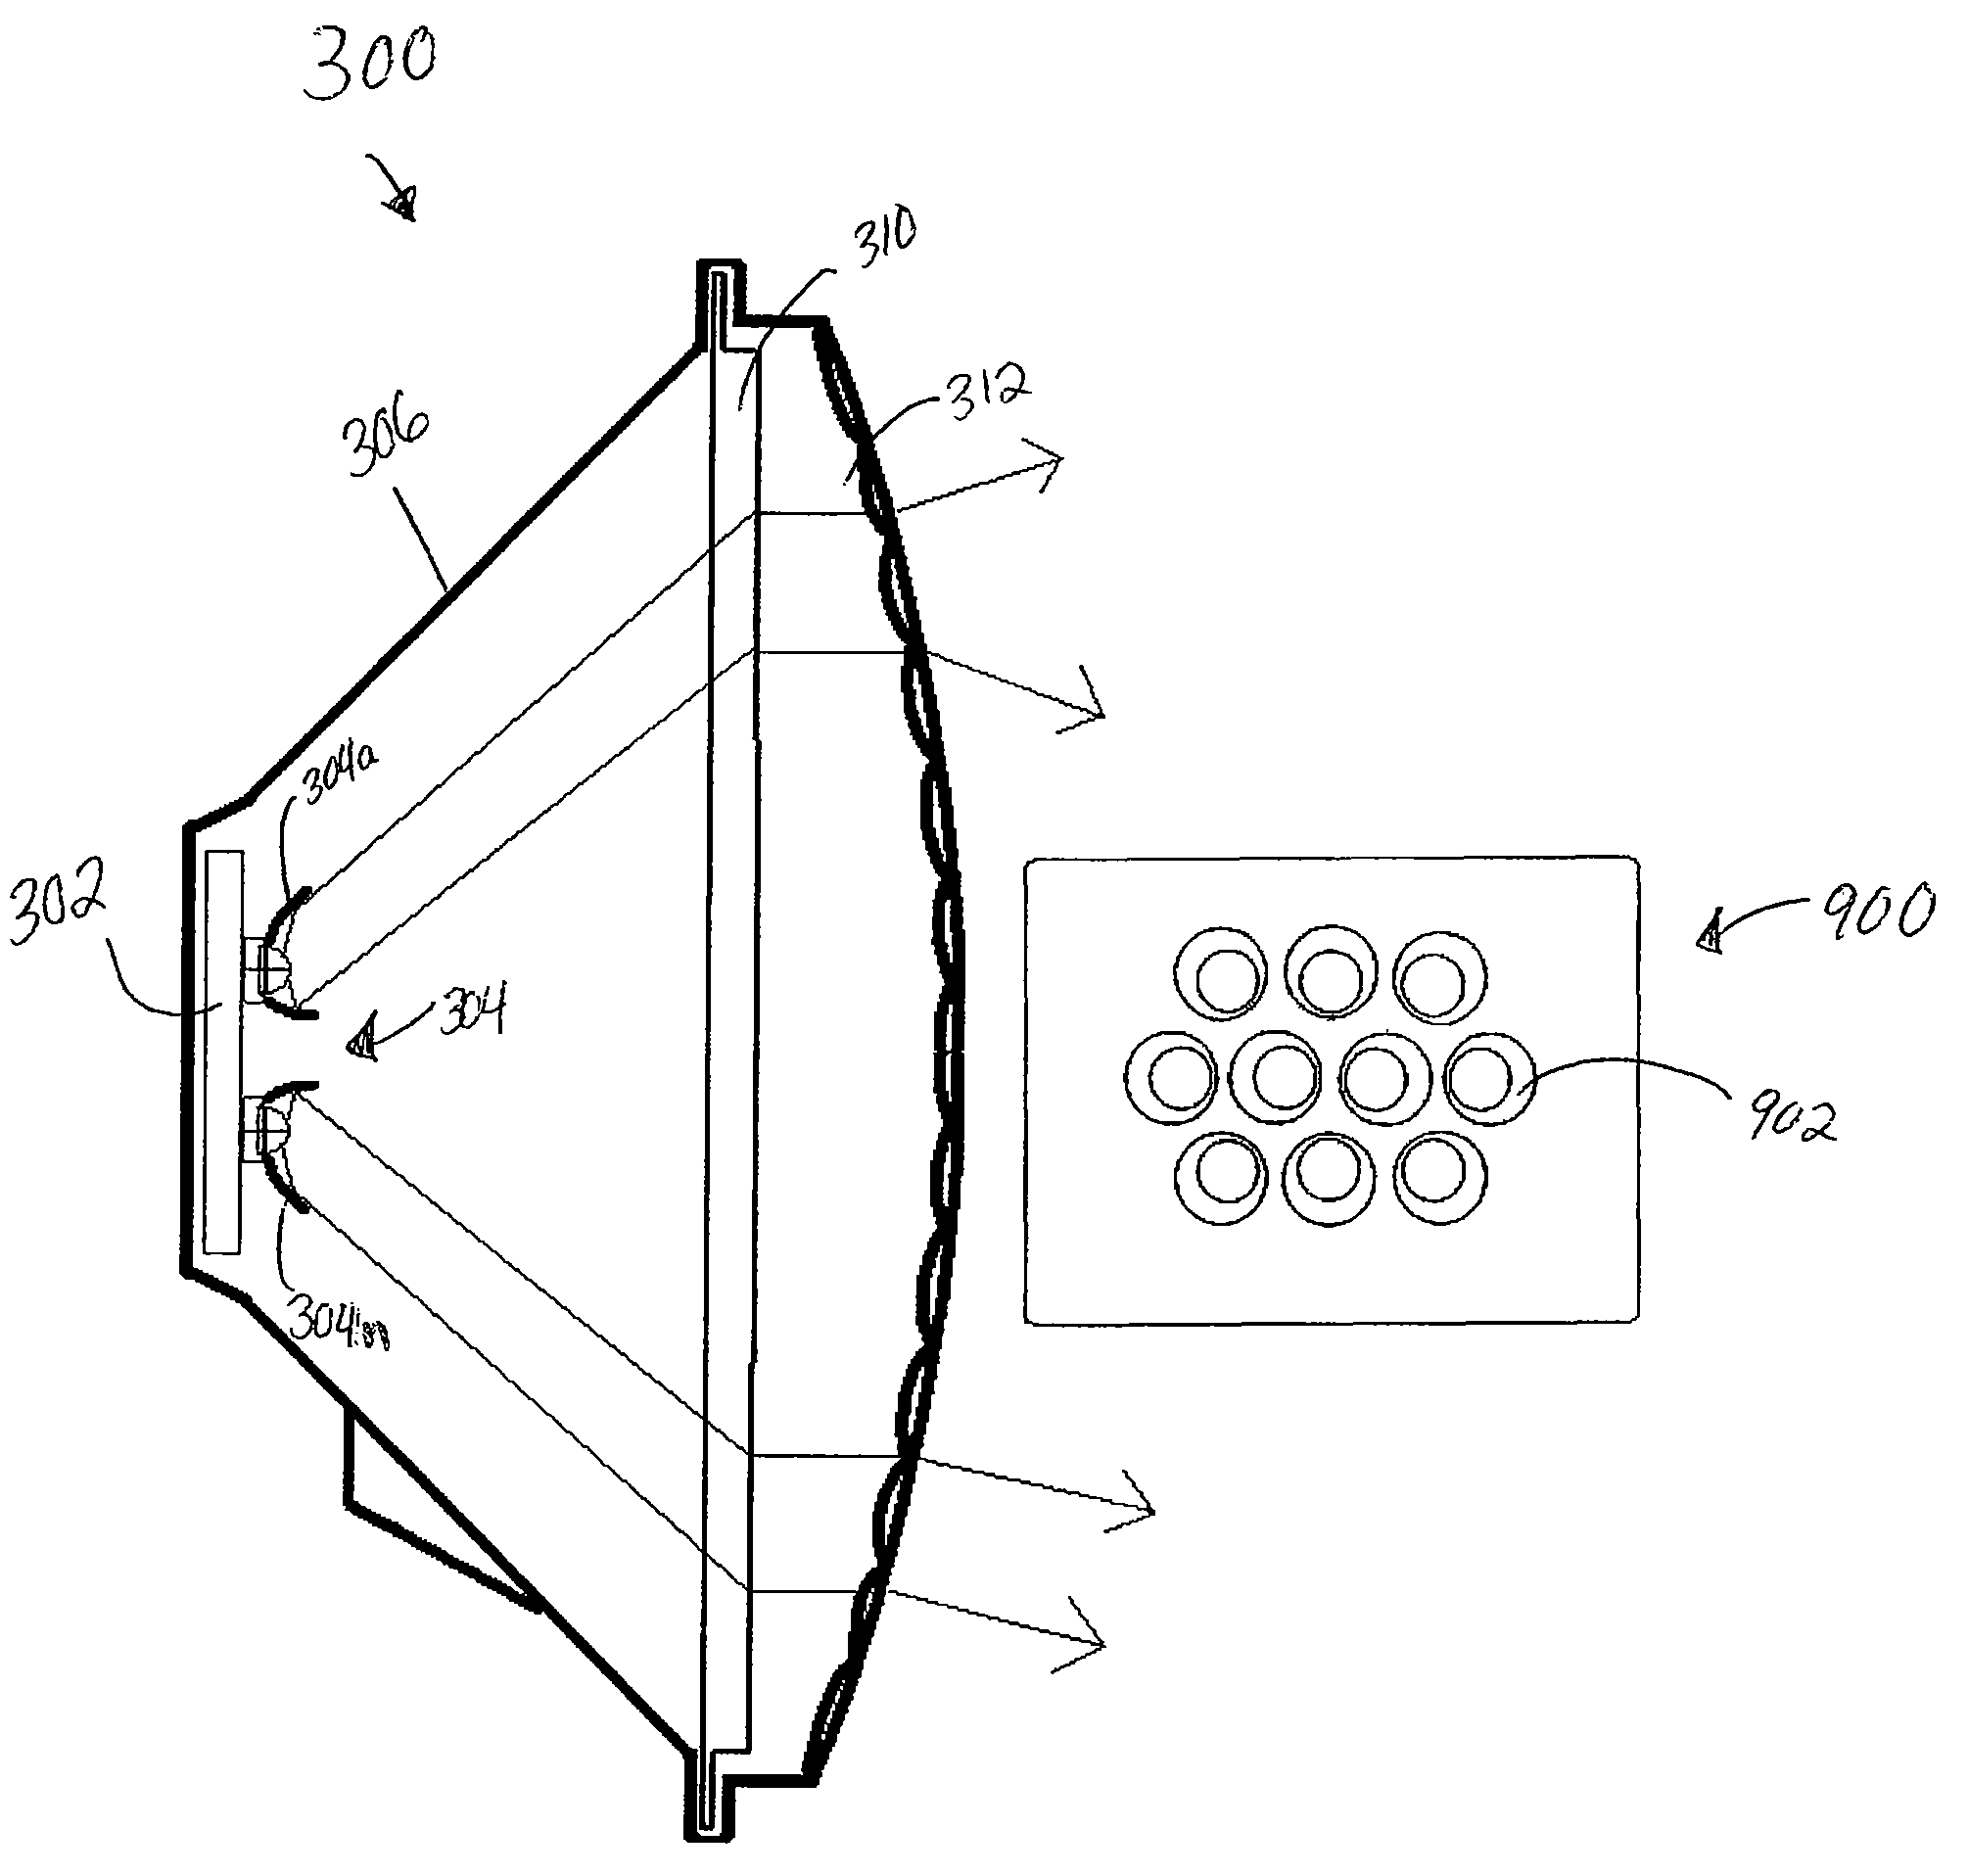 Light emitting diode module with improved light distribution uniformity